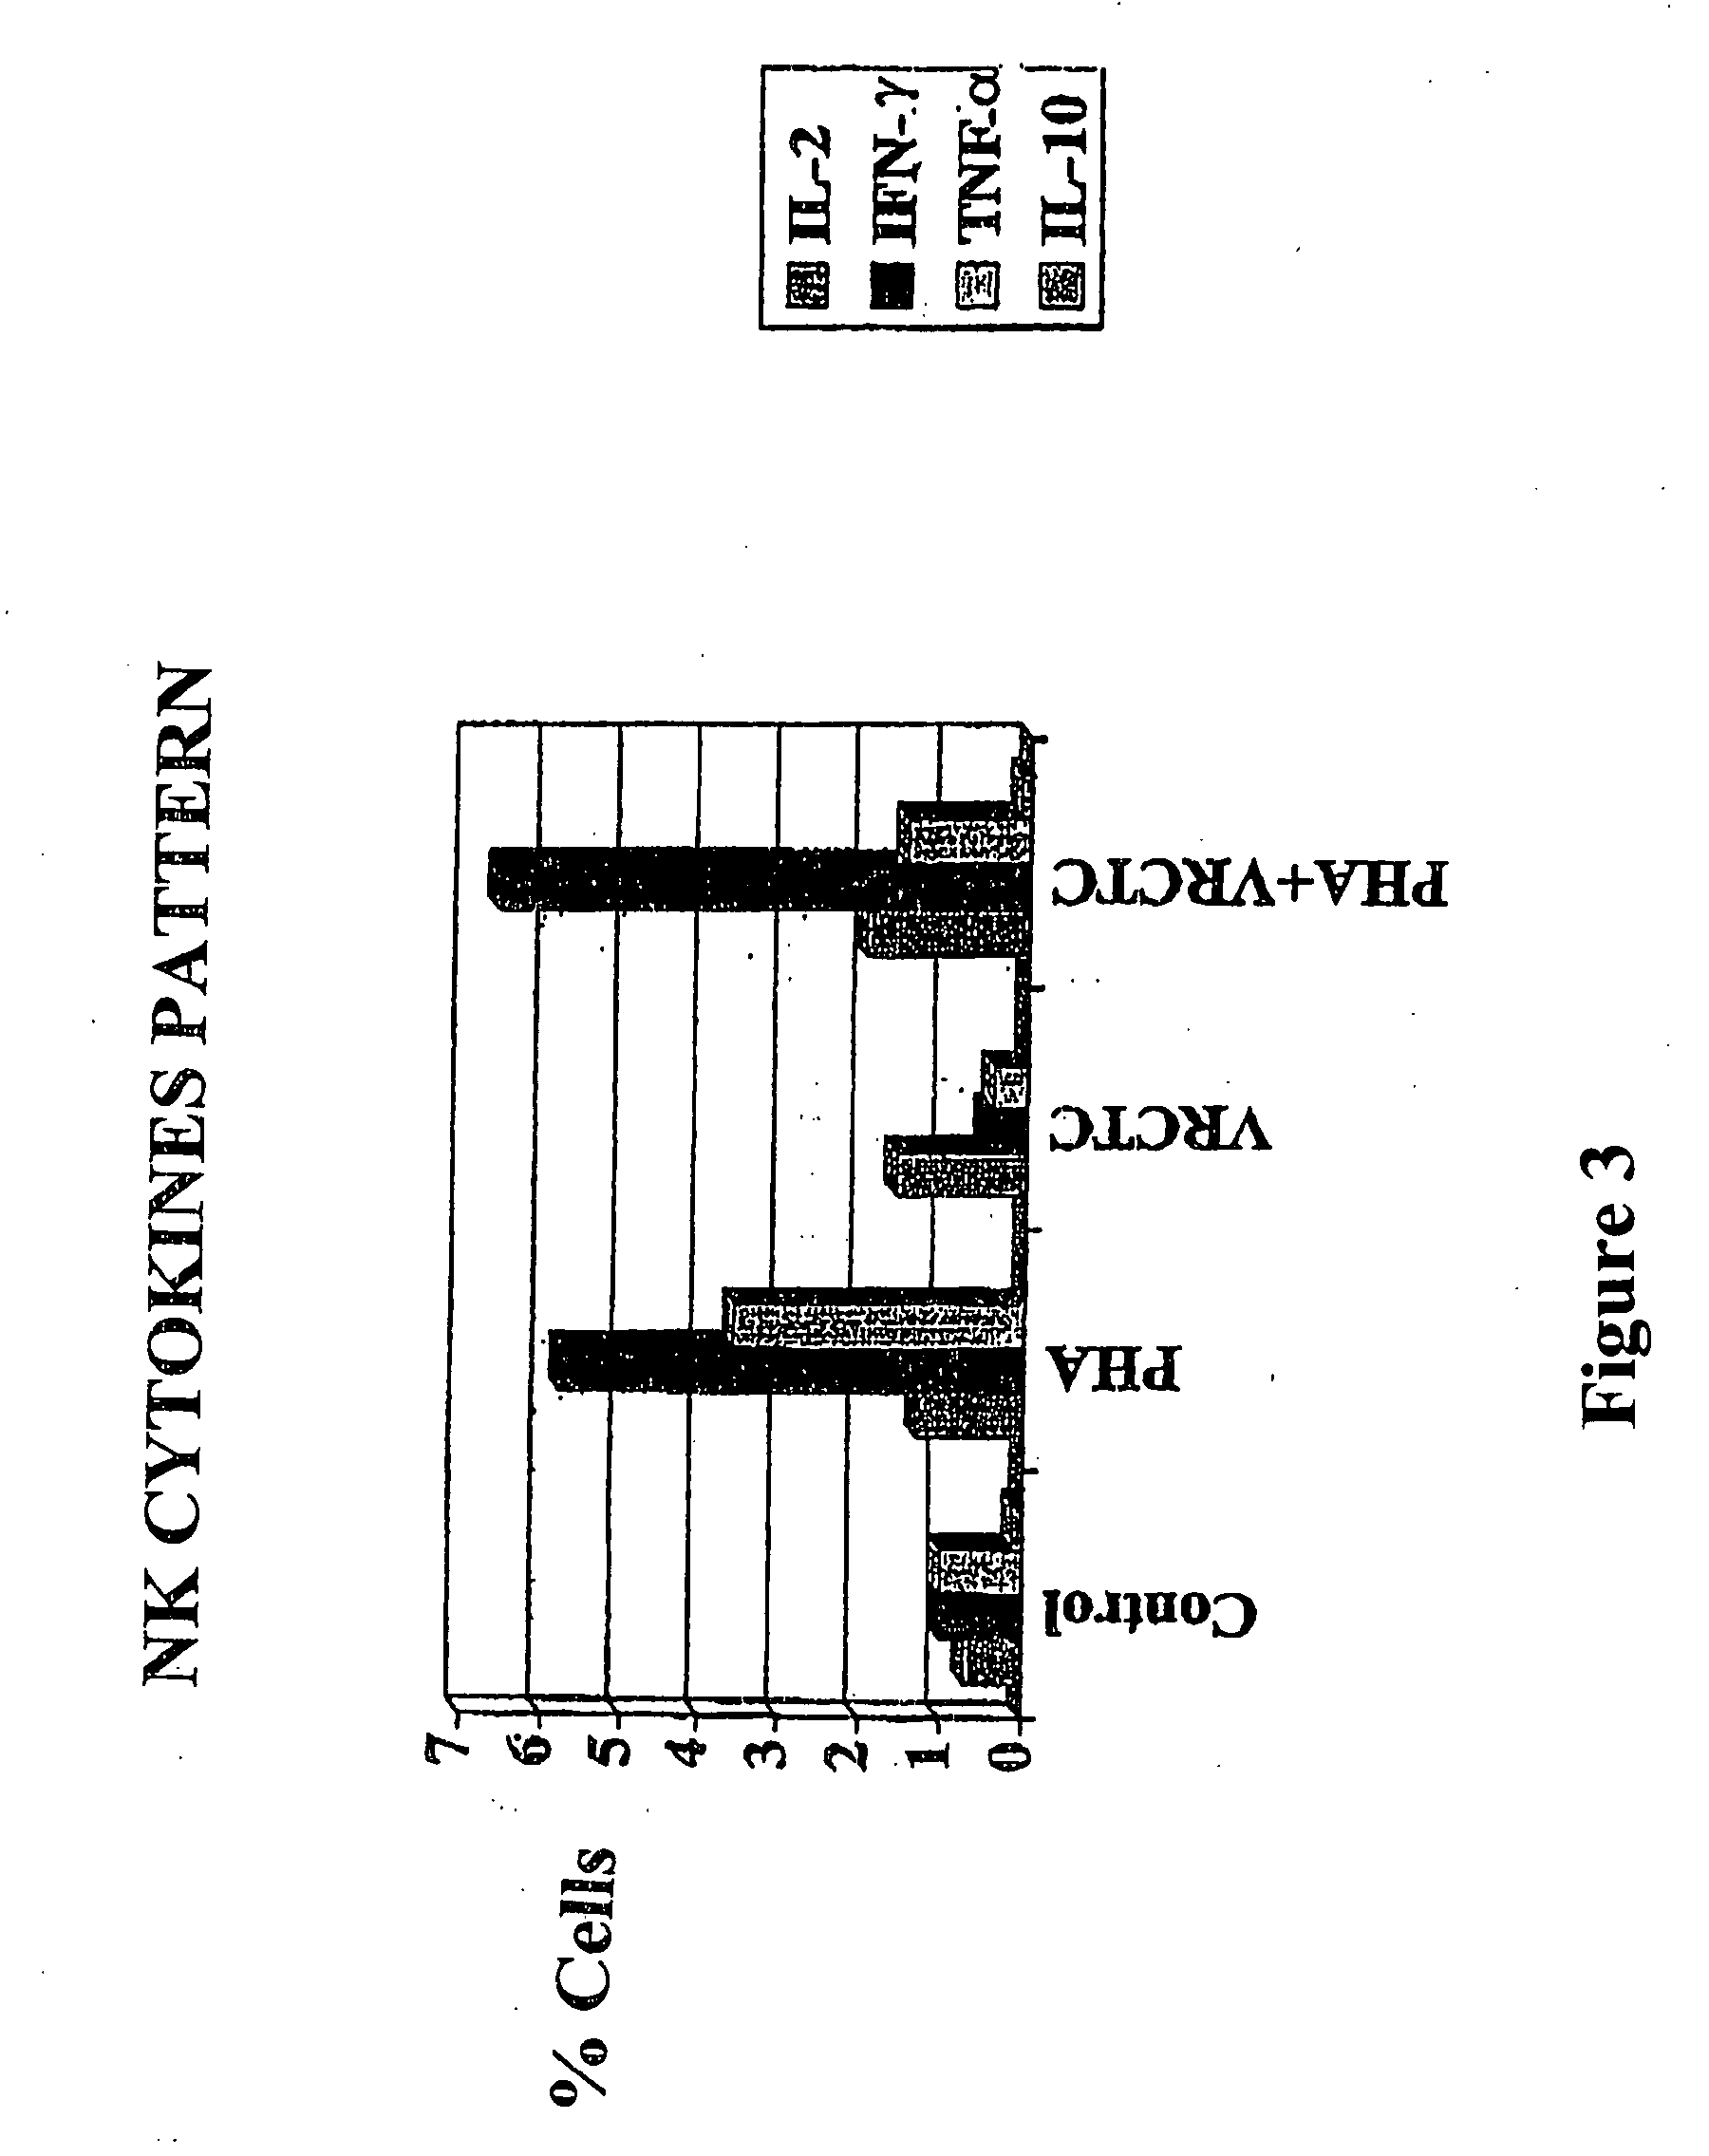 Use of a phospholipase A2 for the preparation of pharmaceutical and/or cosmetic compositions for the local and/or systematic treatment and/or prevention of diseases and/or processes caused by intra- and extracellular pathogens expressing membrane phospholipids